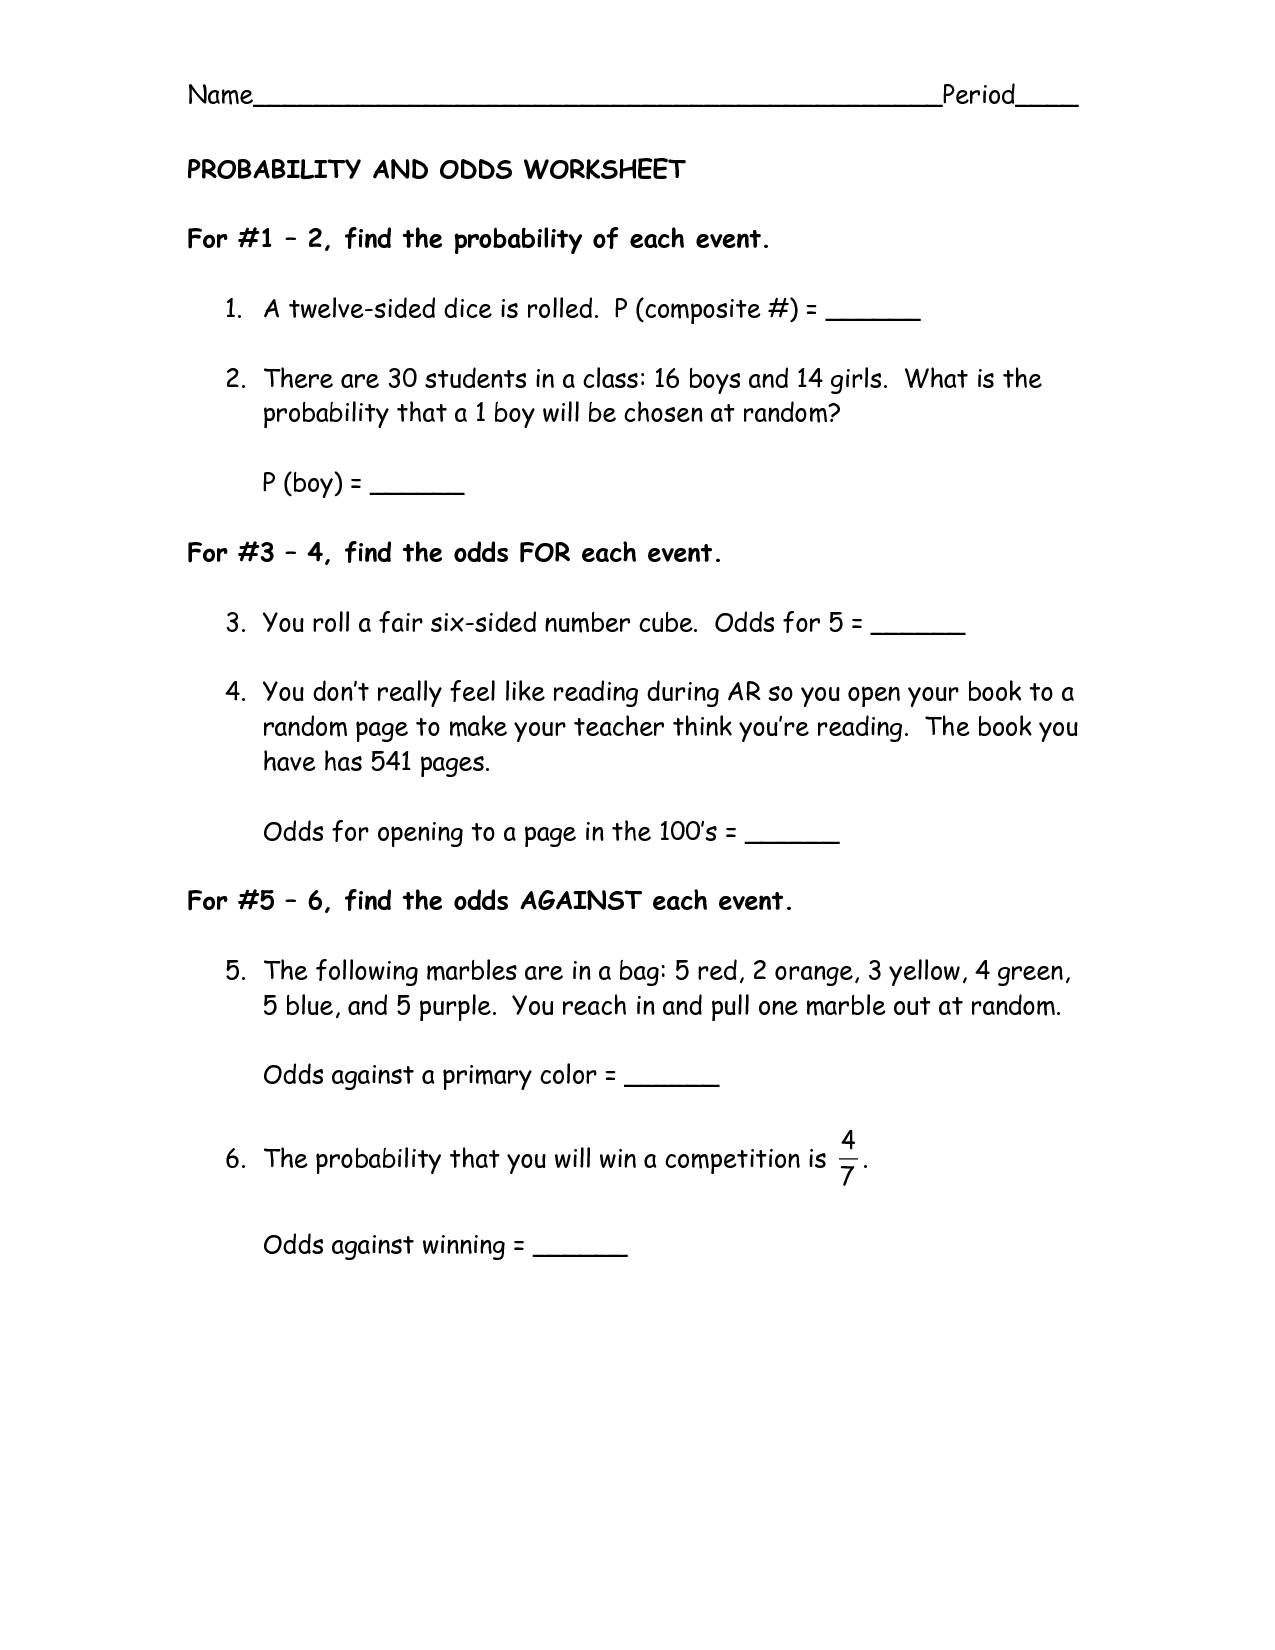 Experimental and Theoretical Probability Worksheet Image